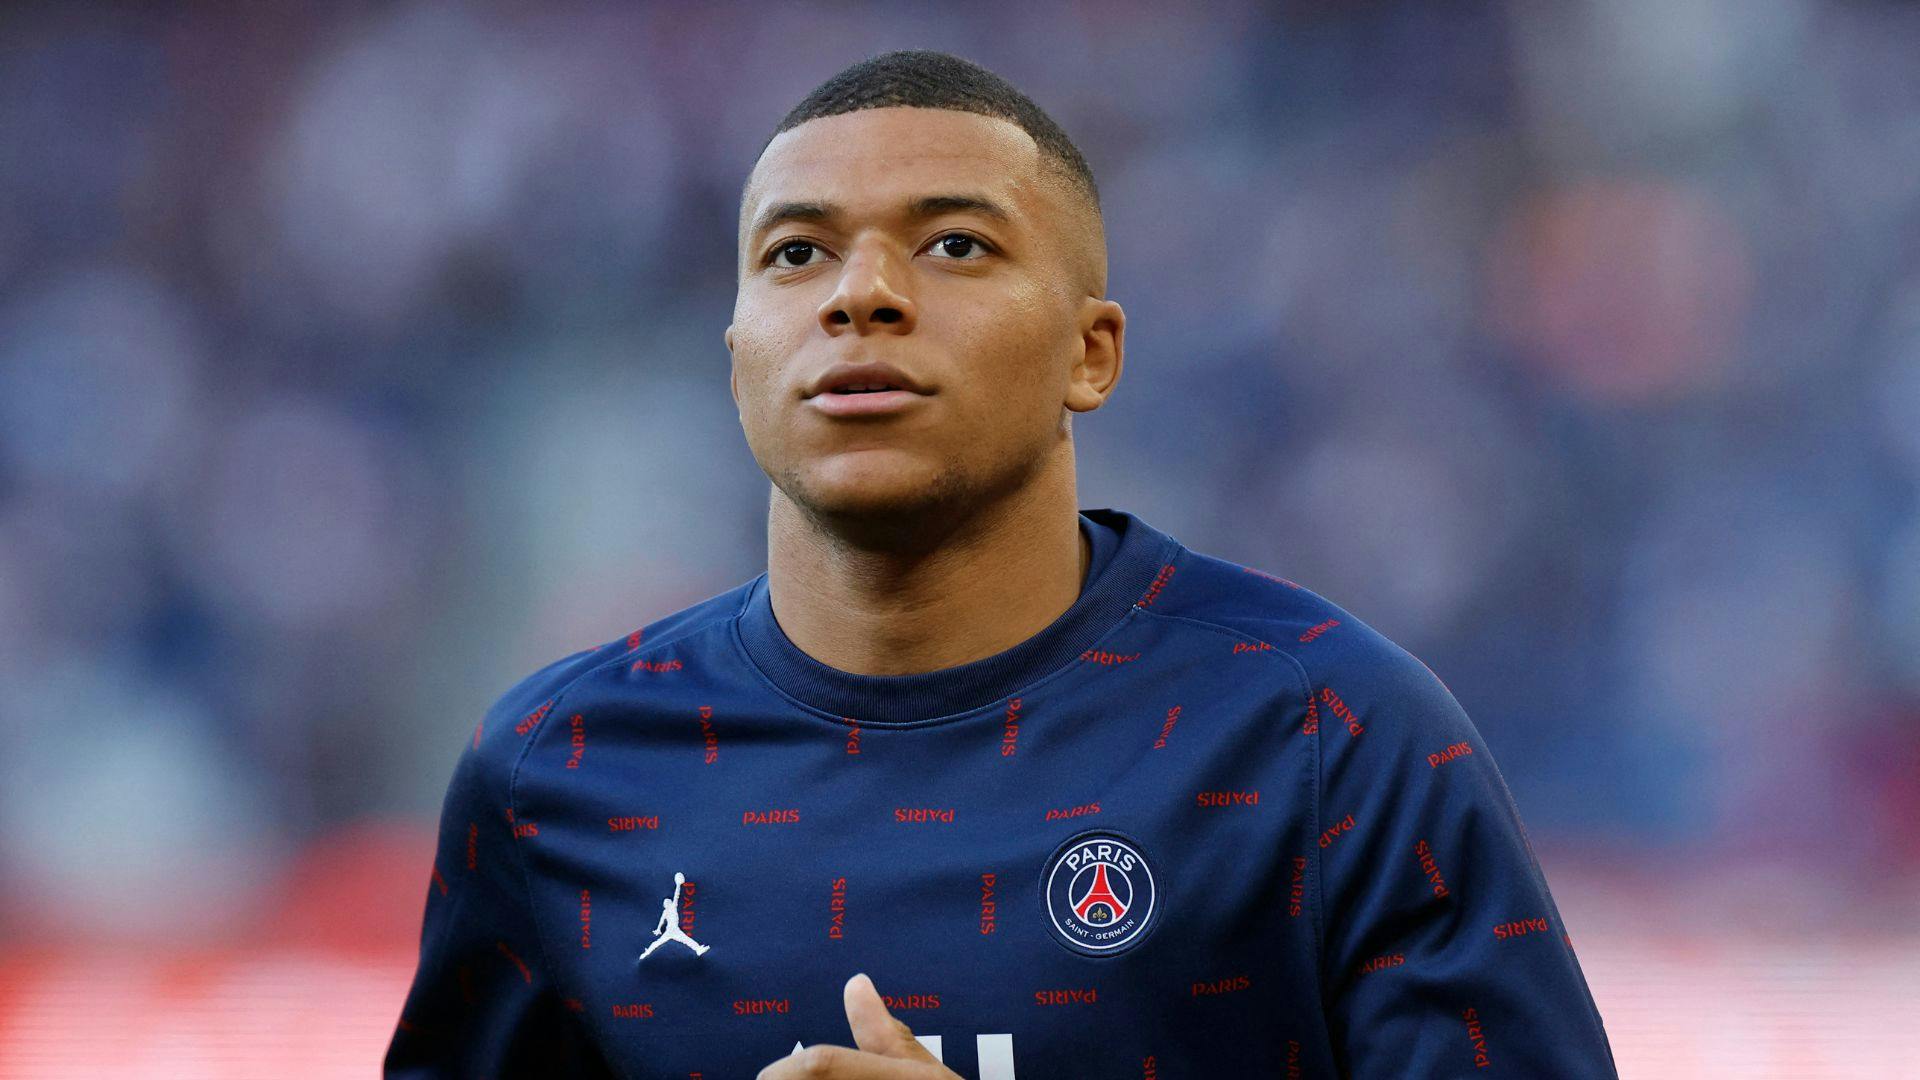 Real Madrid legends, players react to signing of Kylian Mbappé from Paris Saint-Germain